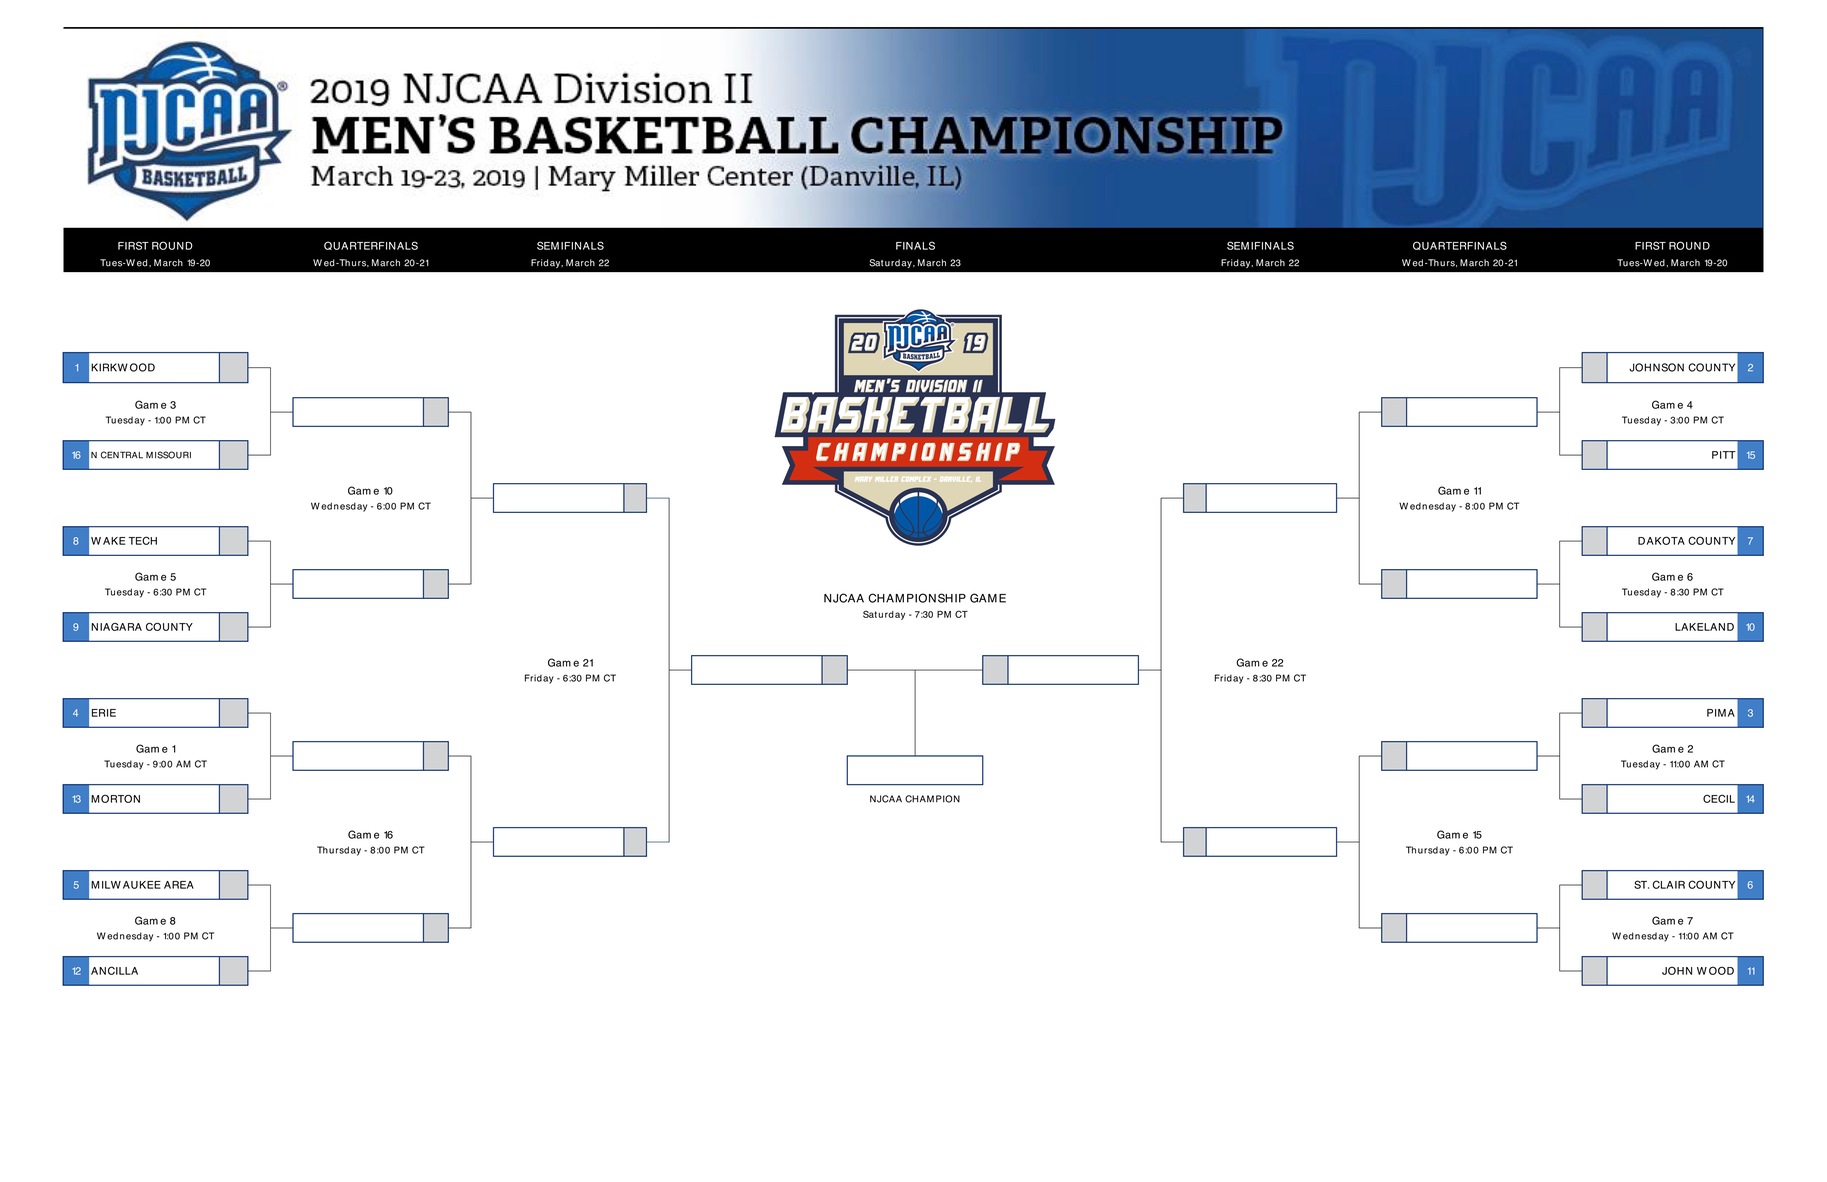 Wake Tech will open the NJCAA, DII National Tournament on Tuesday, March 19 at 7:30pm against Niagara County.